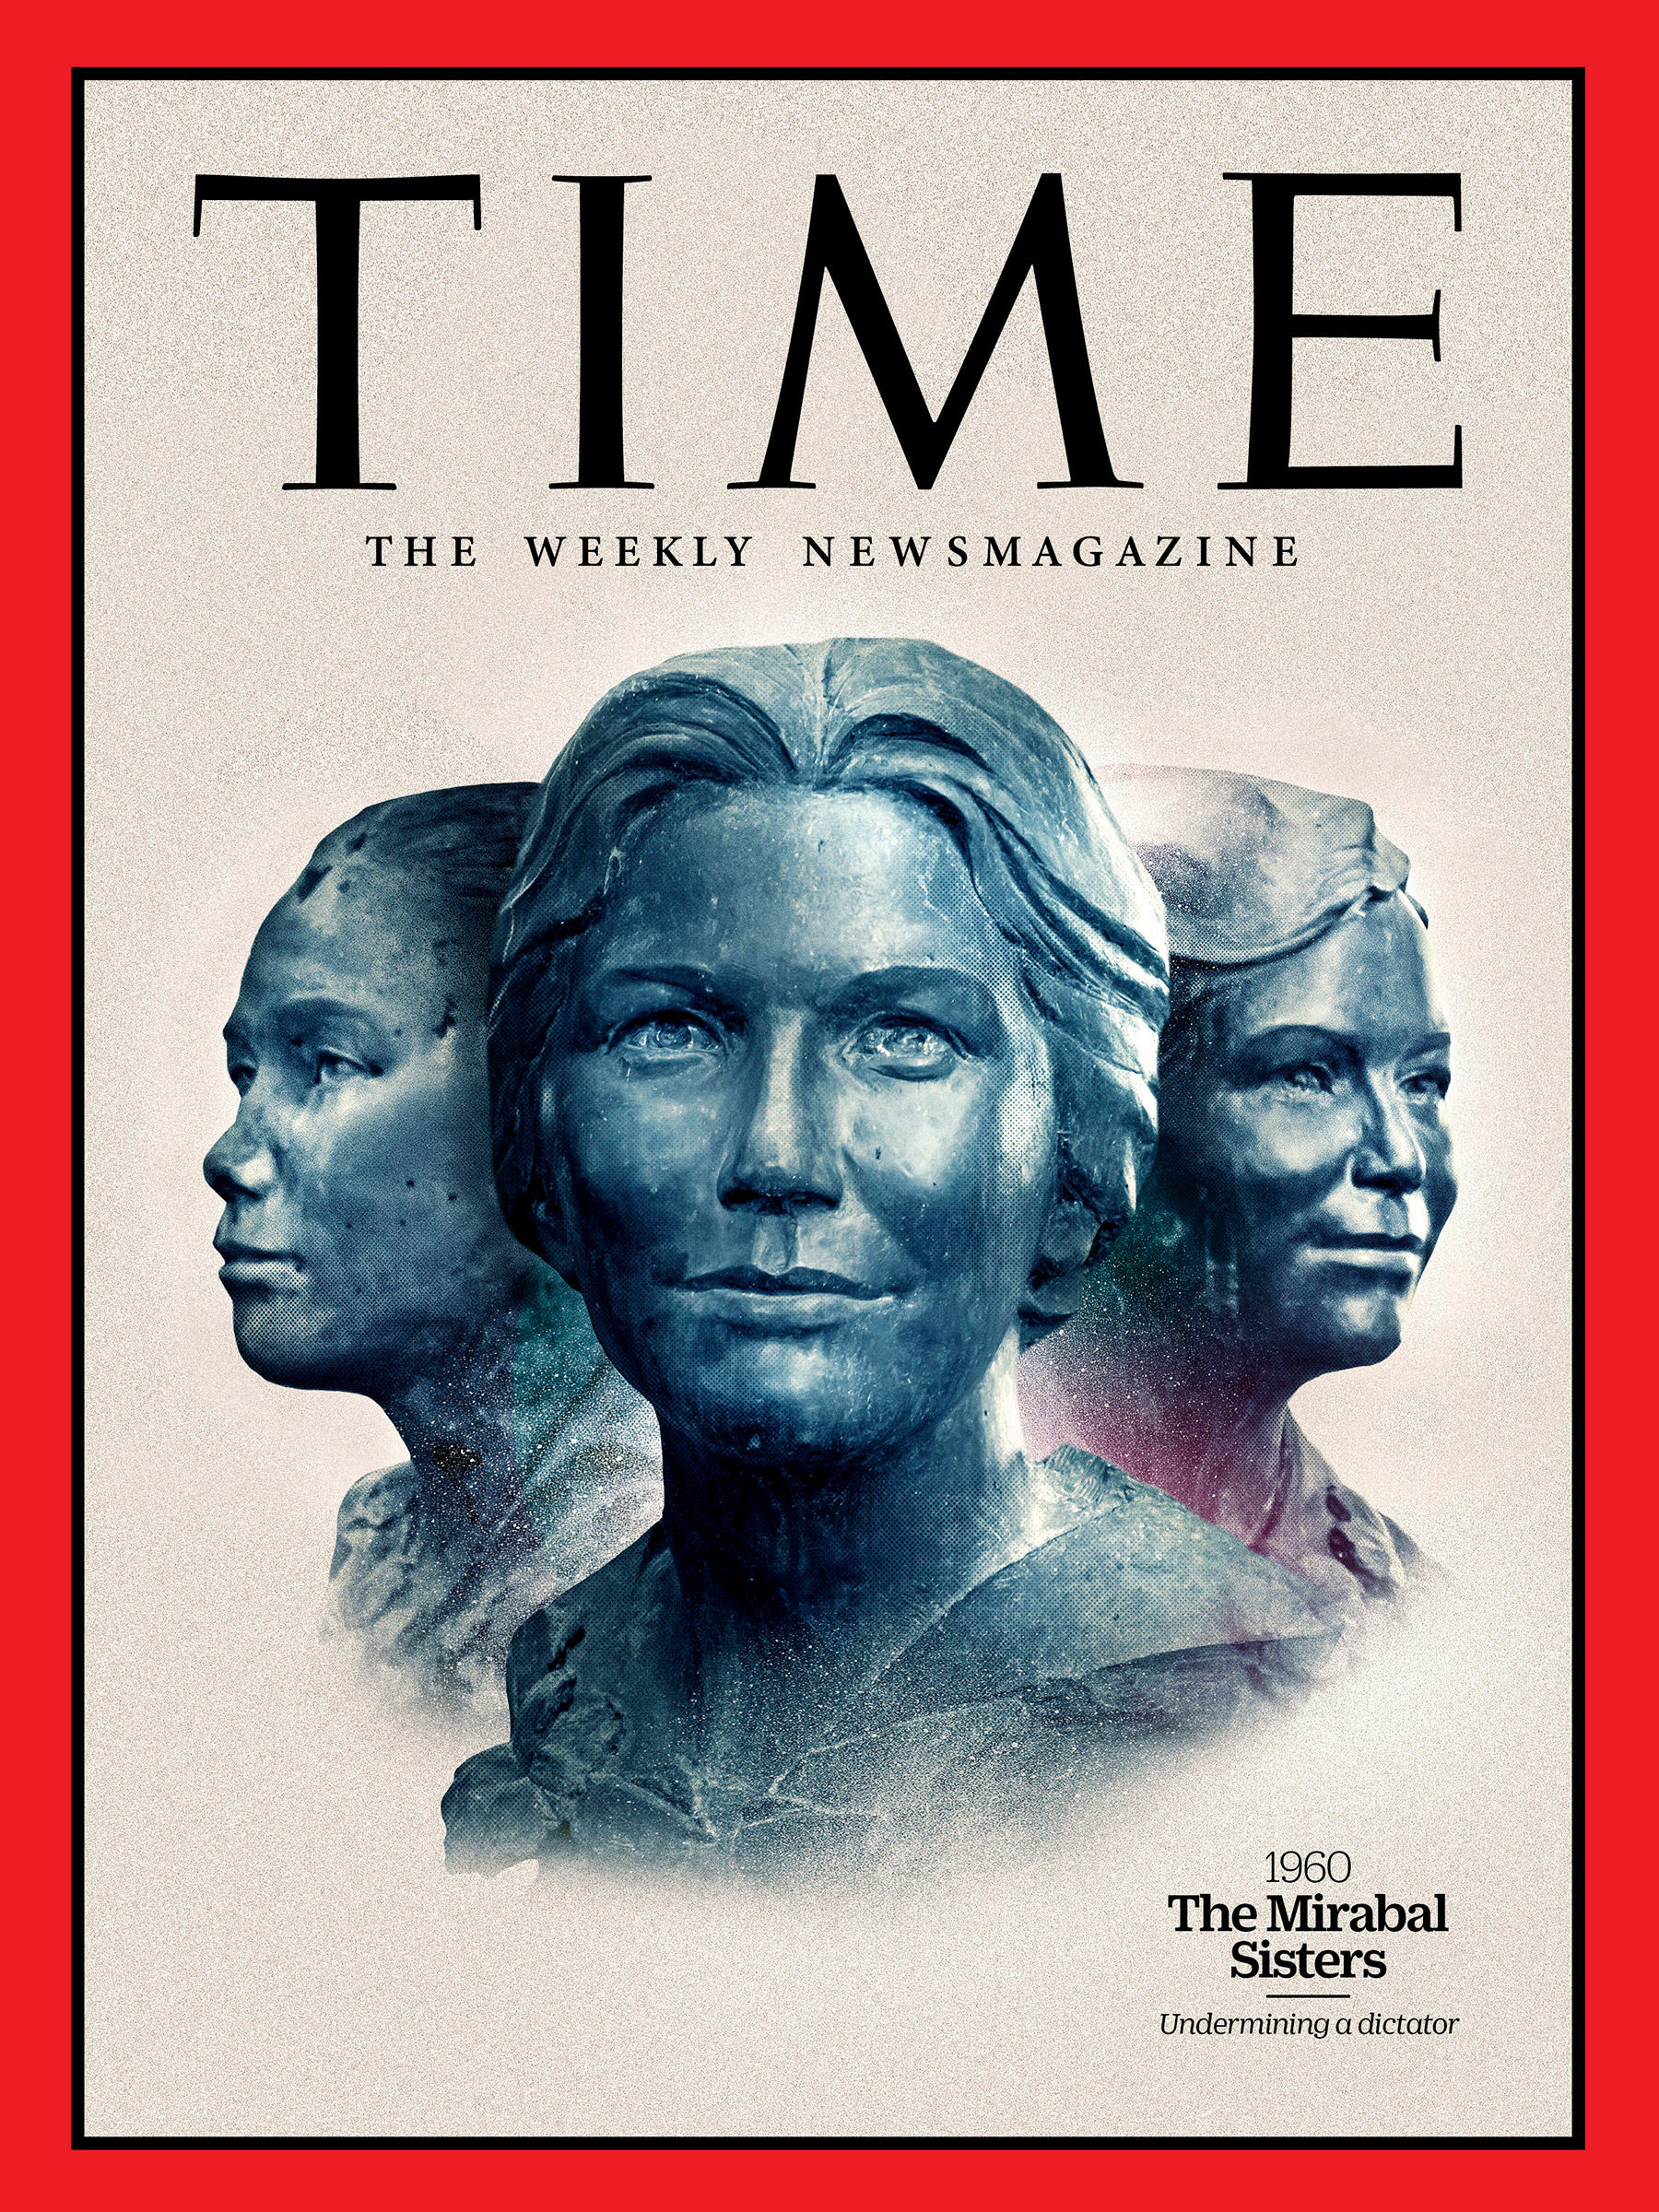 The Mirabal Sisters: 100 Women of the Year | Time